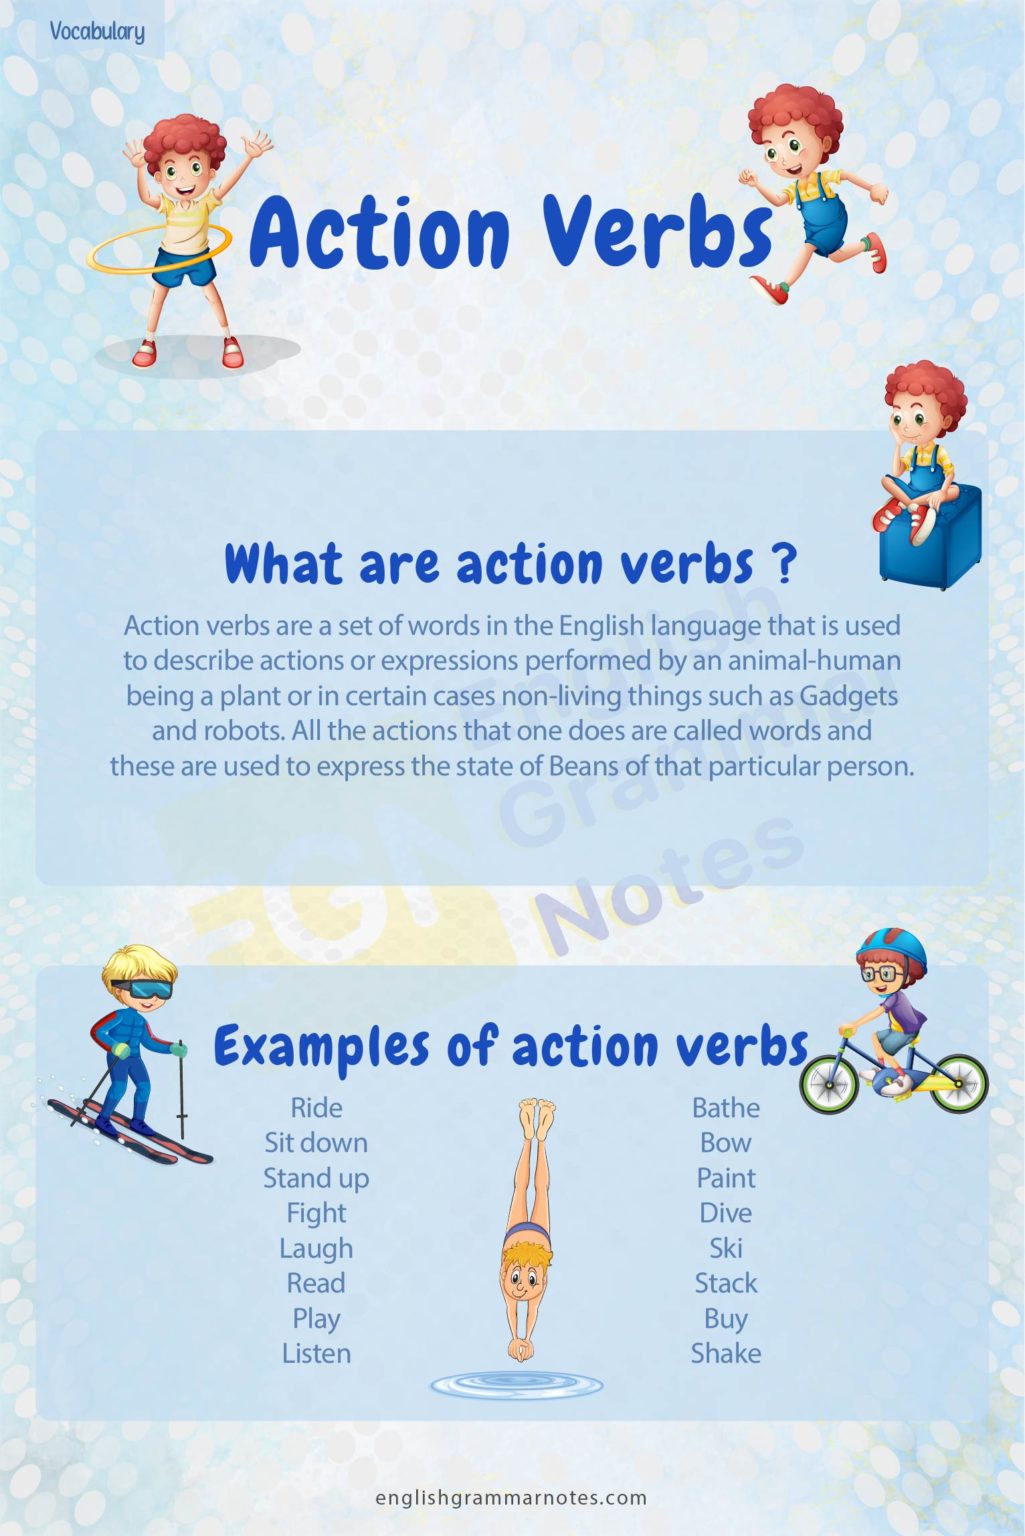 action-verbs-vocabulary-list-of-50-common-action-verbs-with-pictures-english-grammar-notes